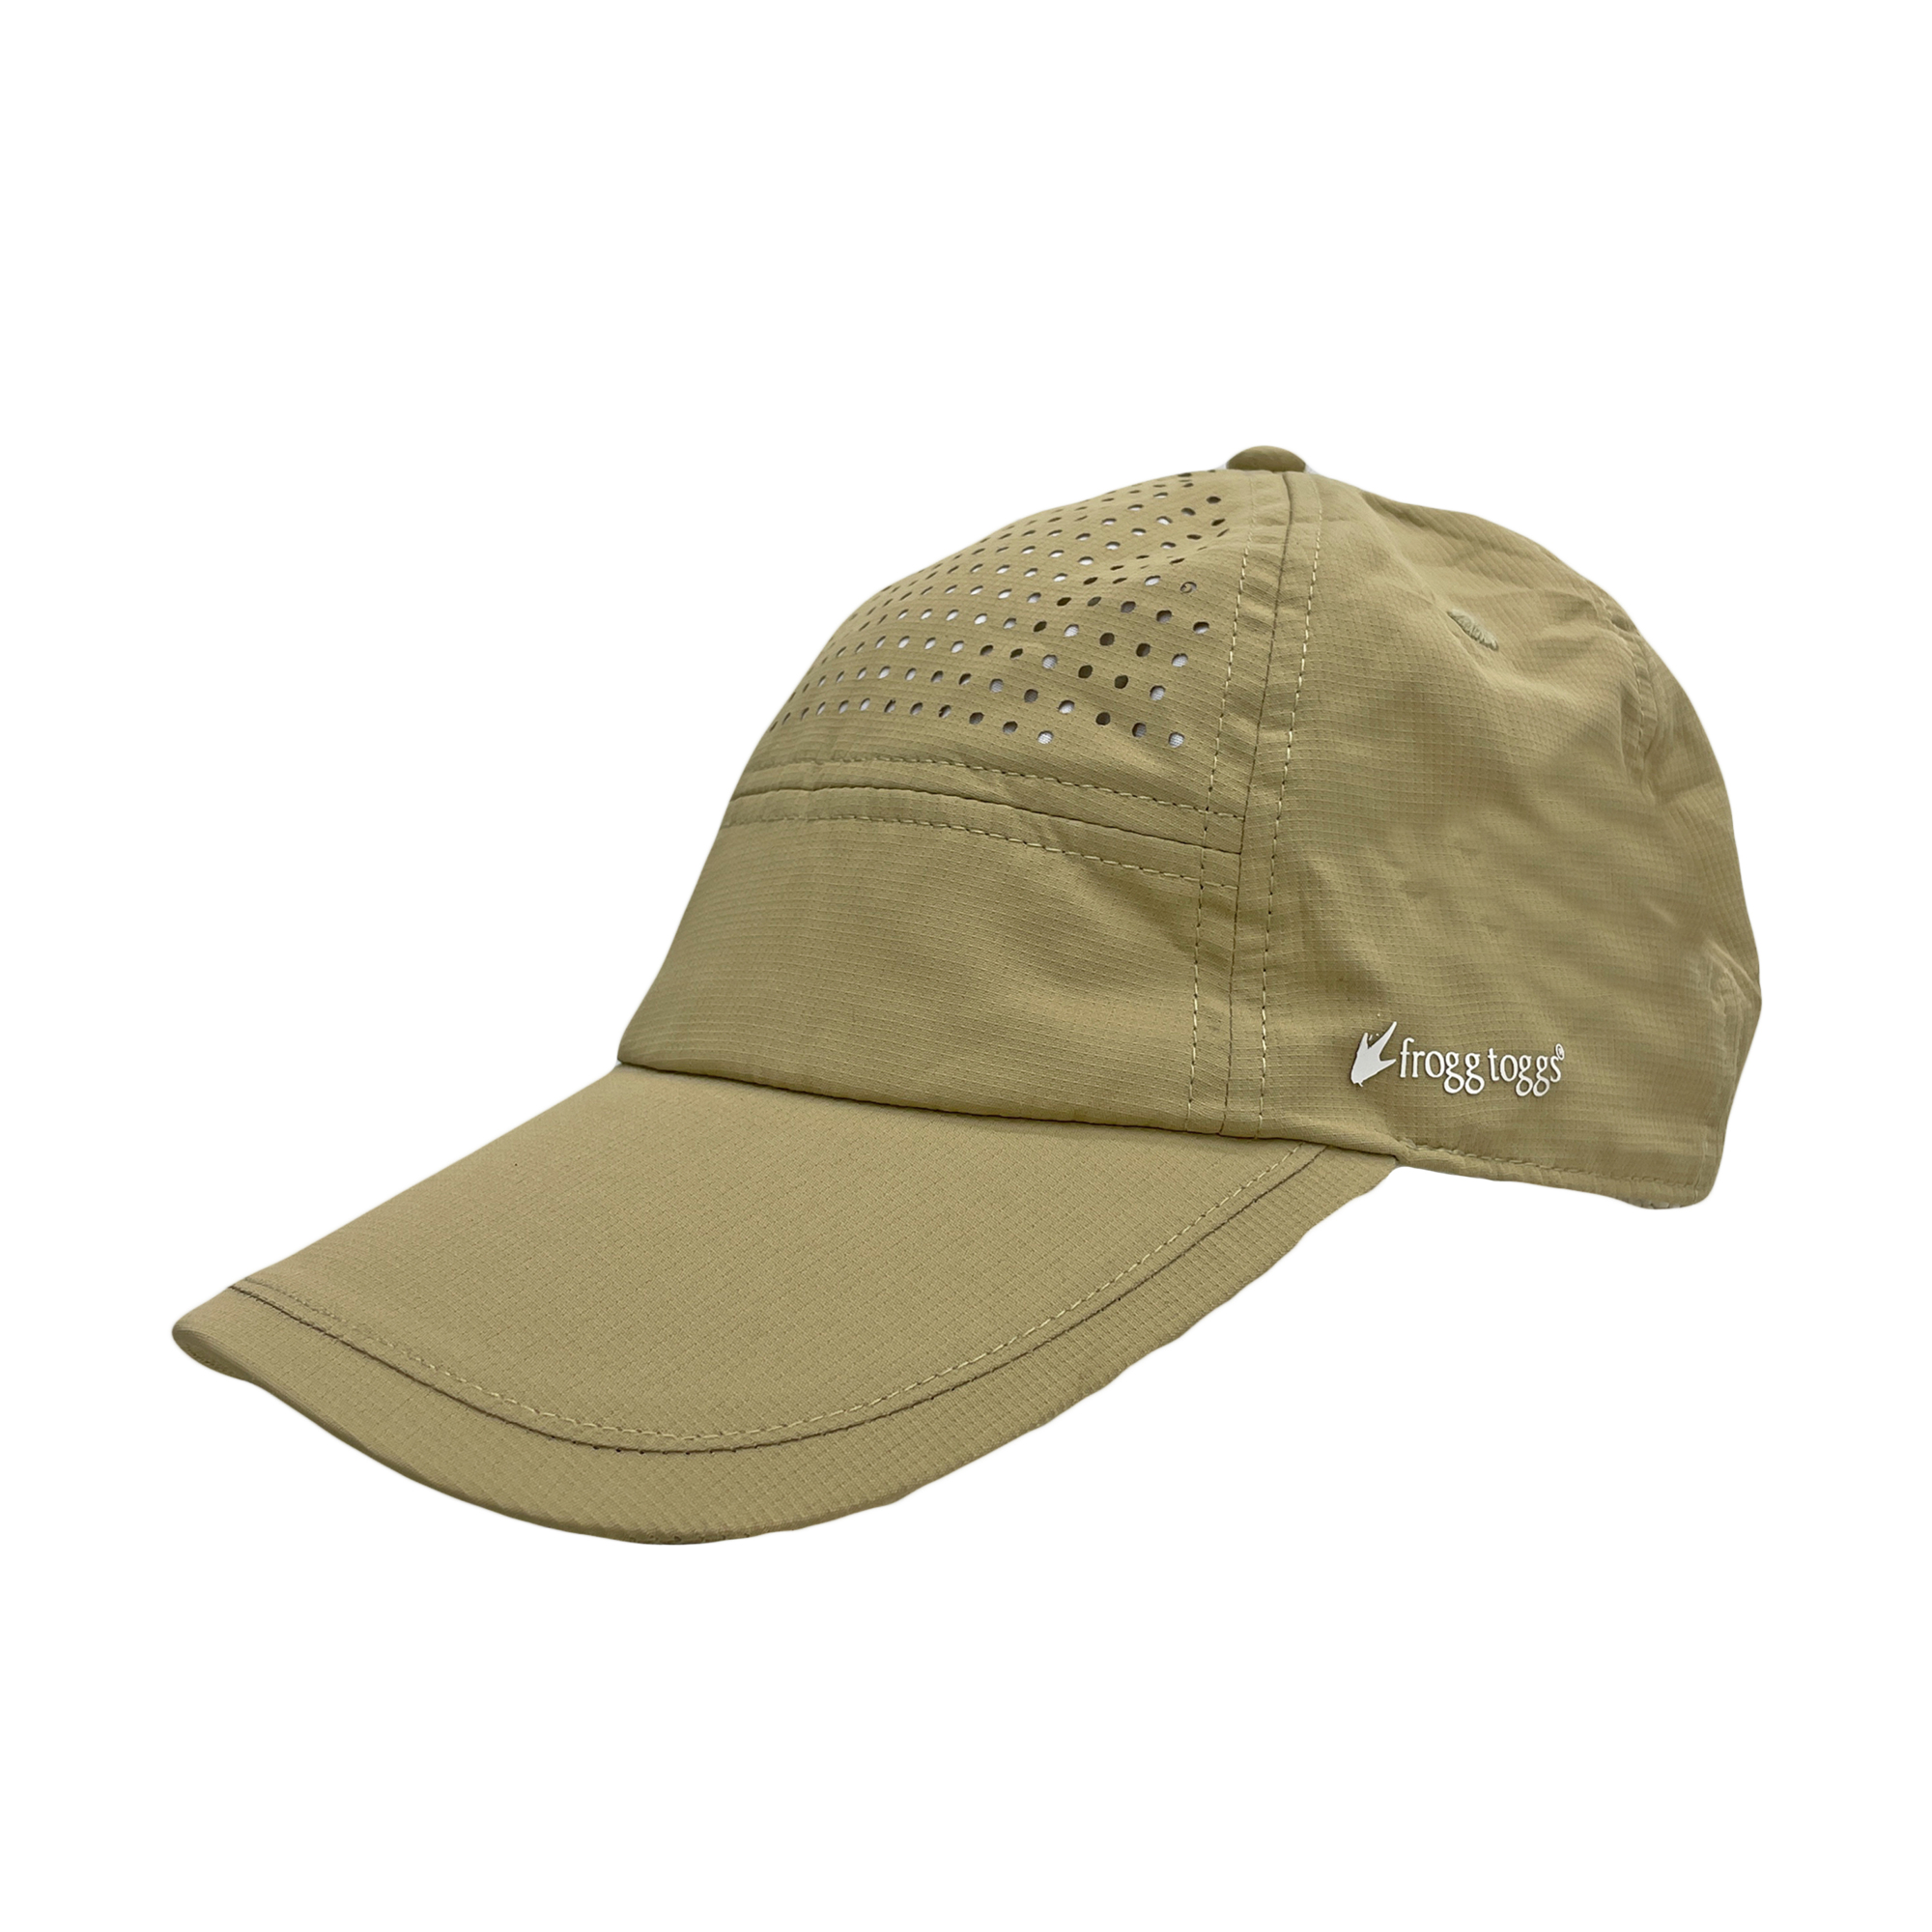 frogg toggs, Chilly Pro Performance Cooling Cap, Size One Size, Color Khaki, Hat Style Hat, Model 6CCP21-310